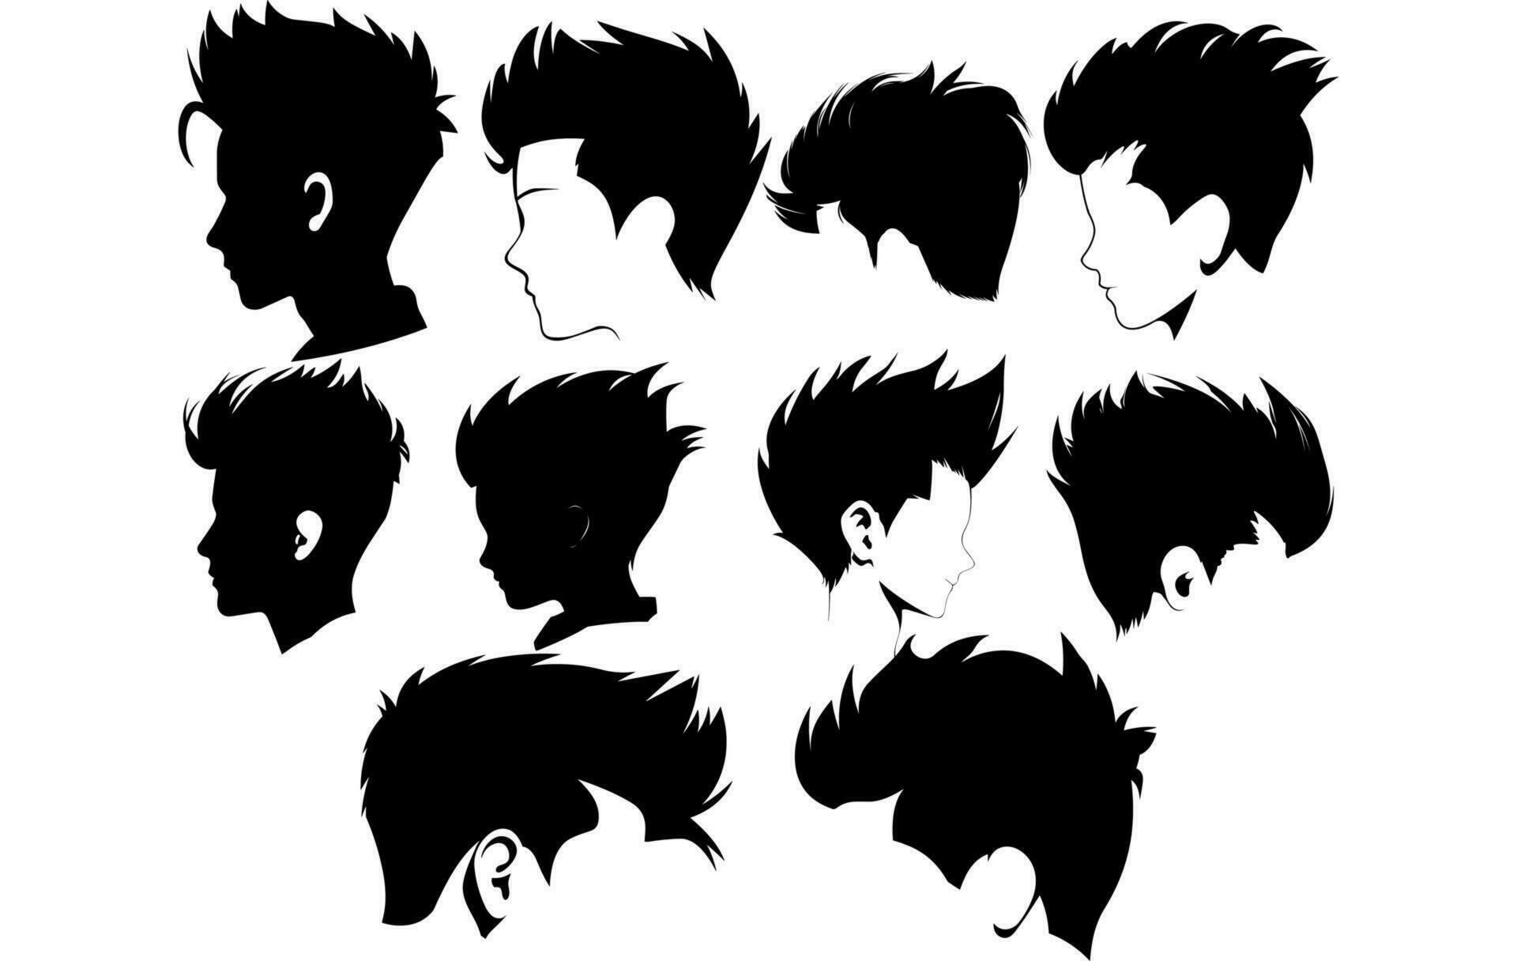 Fade hair style silhouette clipart,trendy stylish man hairs,set of men hair styles and hair cuts, vector